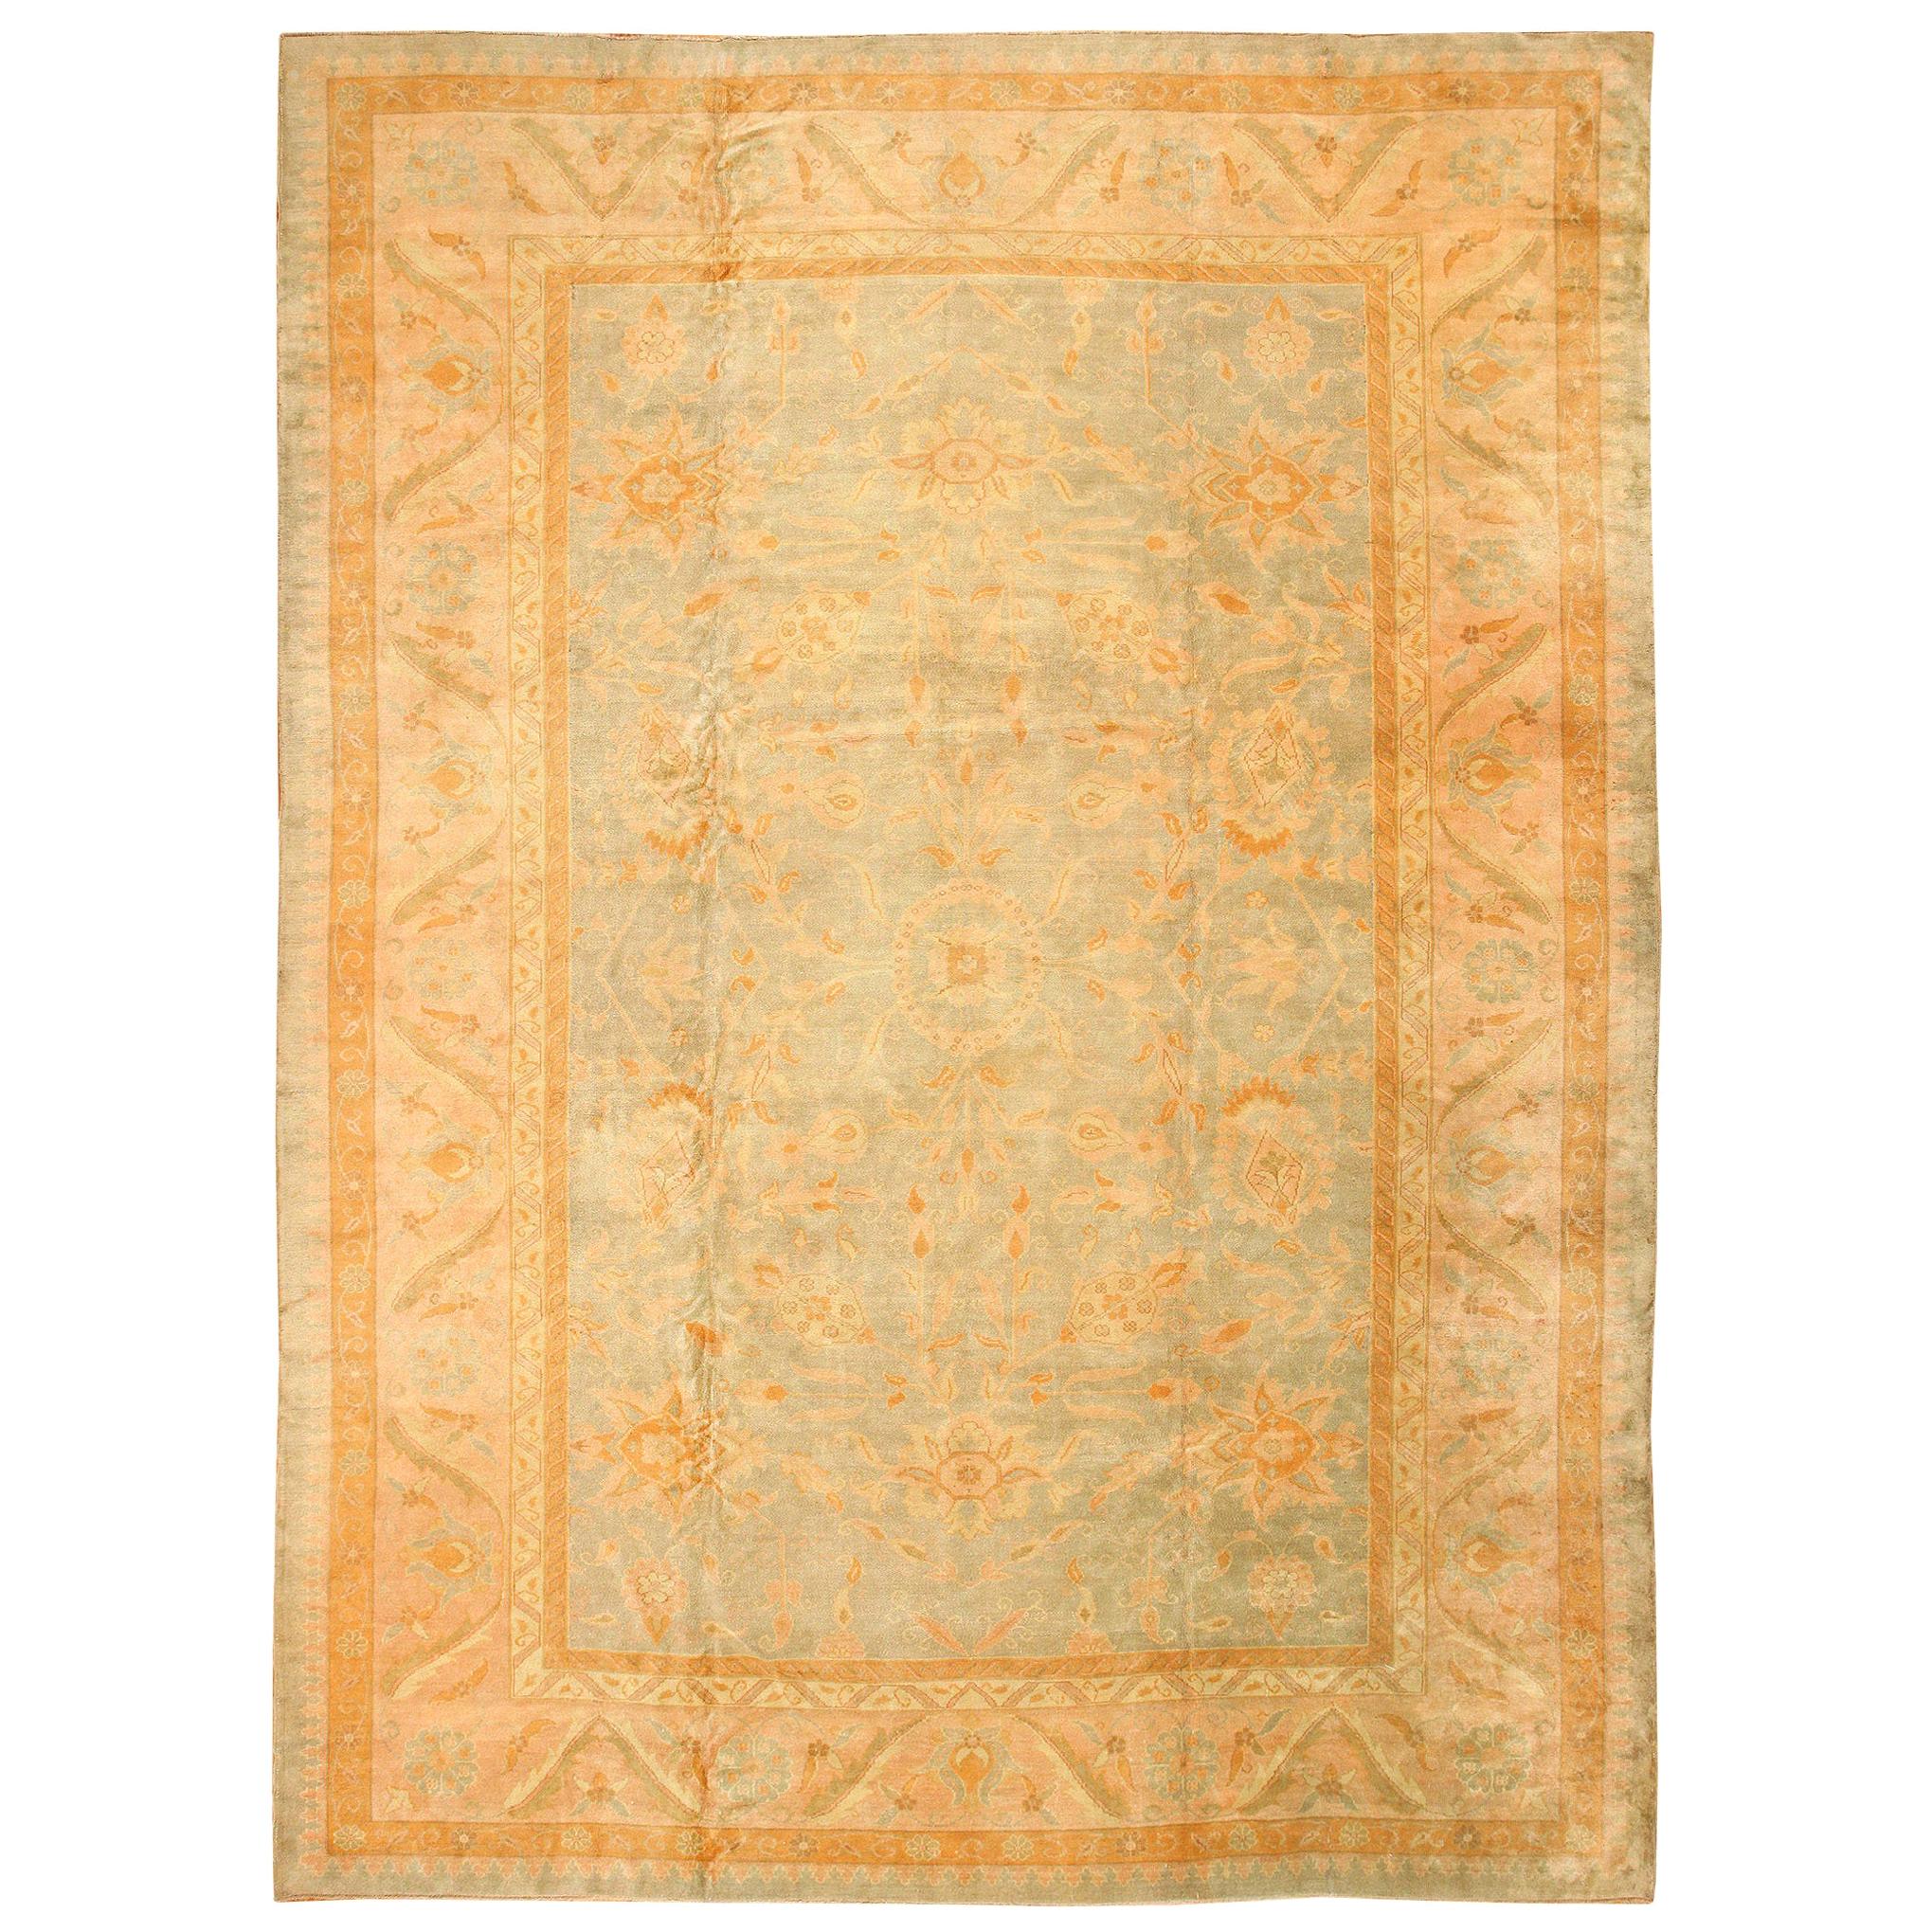 Decorative Large Antique Turkish Rug. Size: 11 ft x 15 ft 3 in (3.35 m x 4.65 m) For Sale